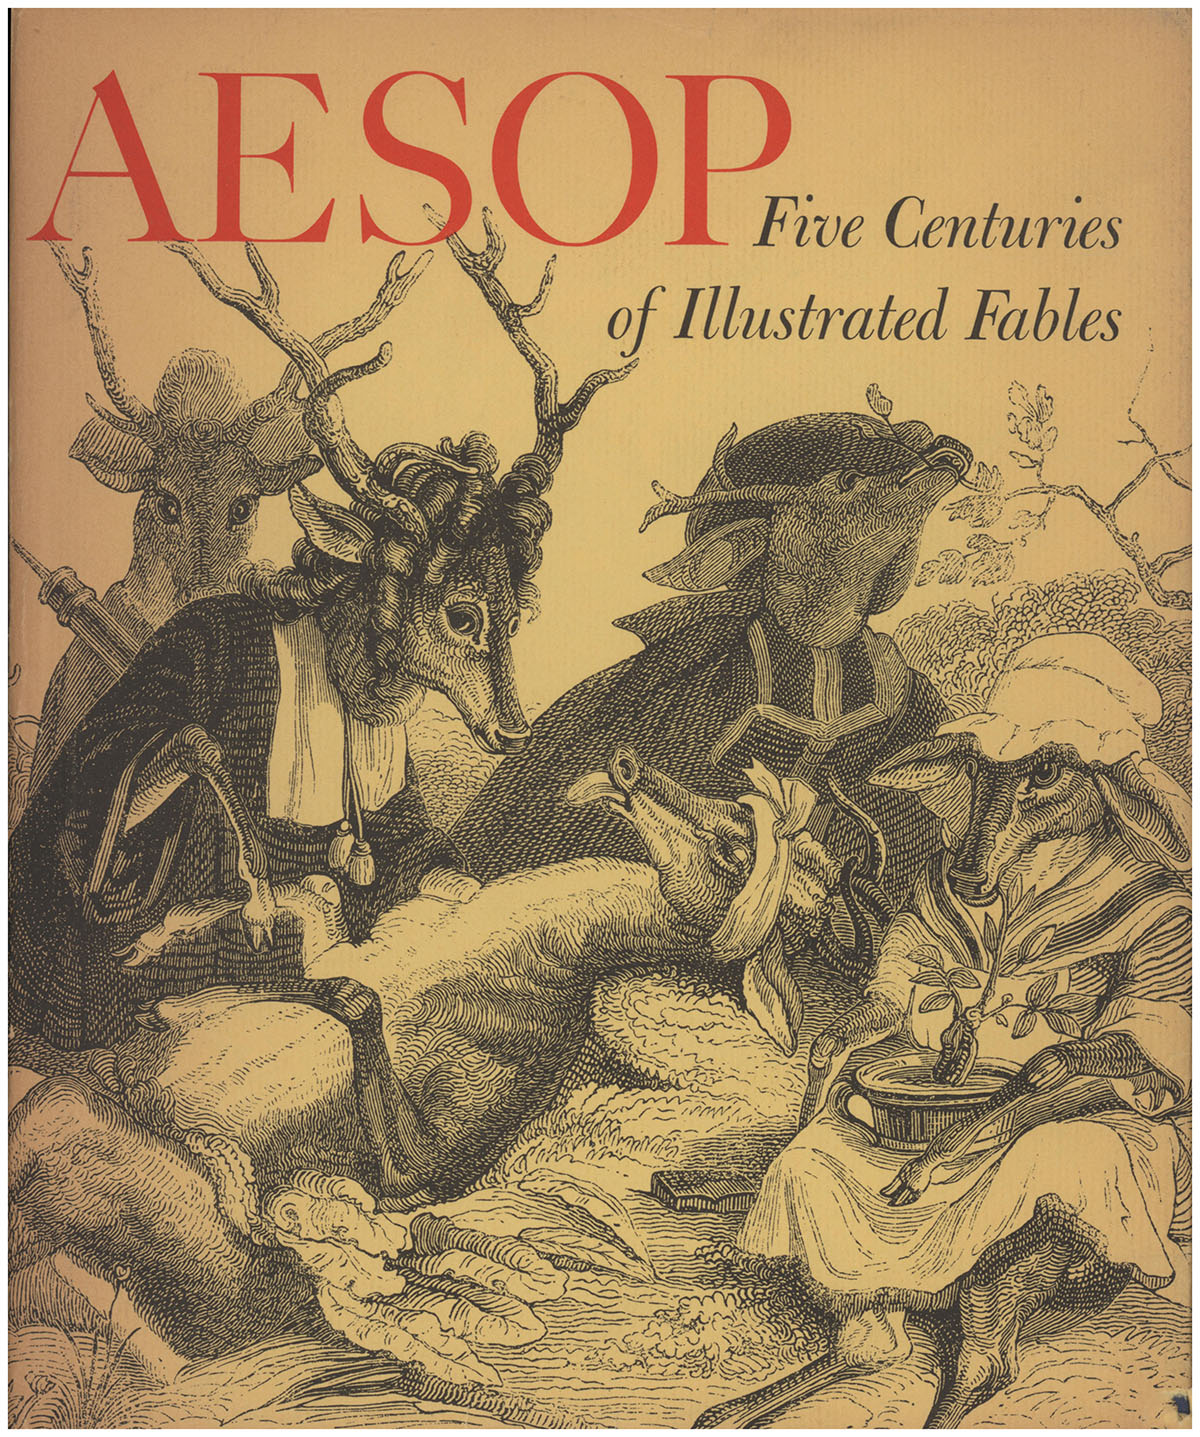 McKendry, John J. (compiler) - Aesop: Five Centuries of Illustrated Fables